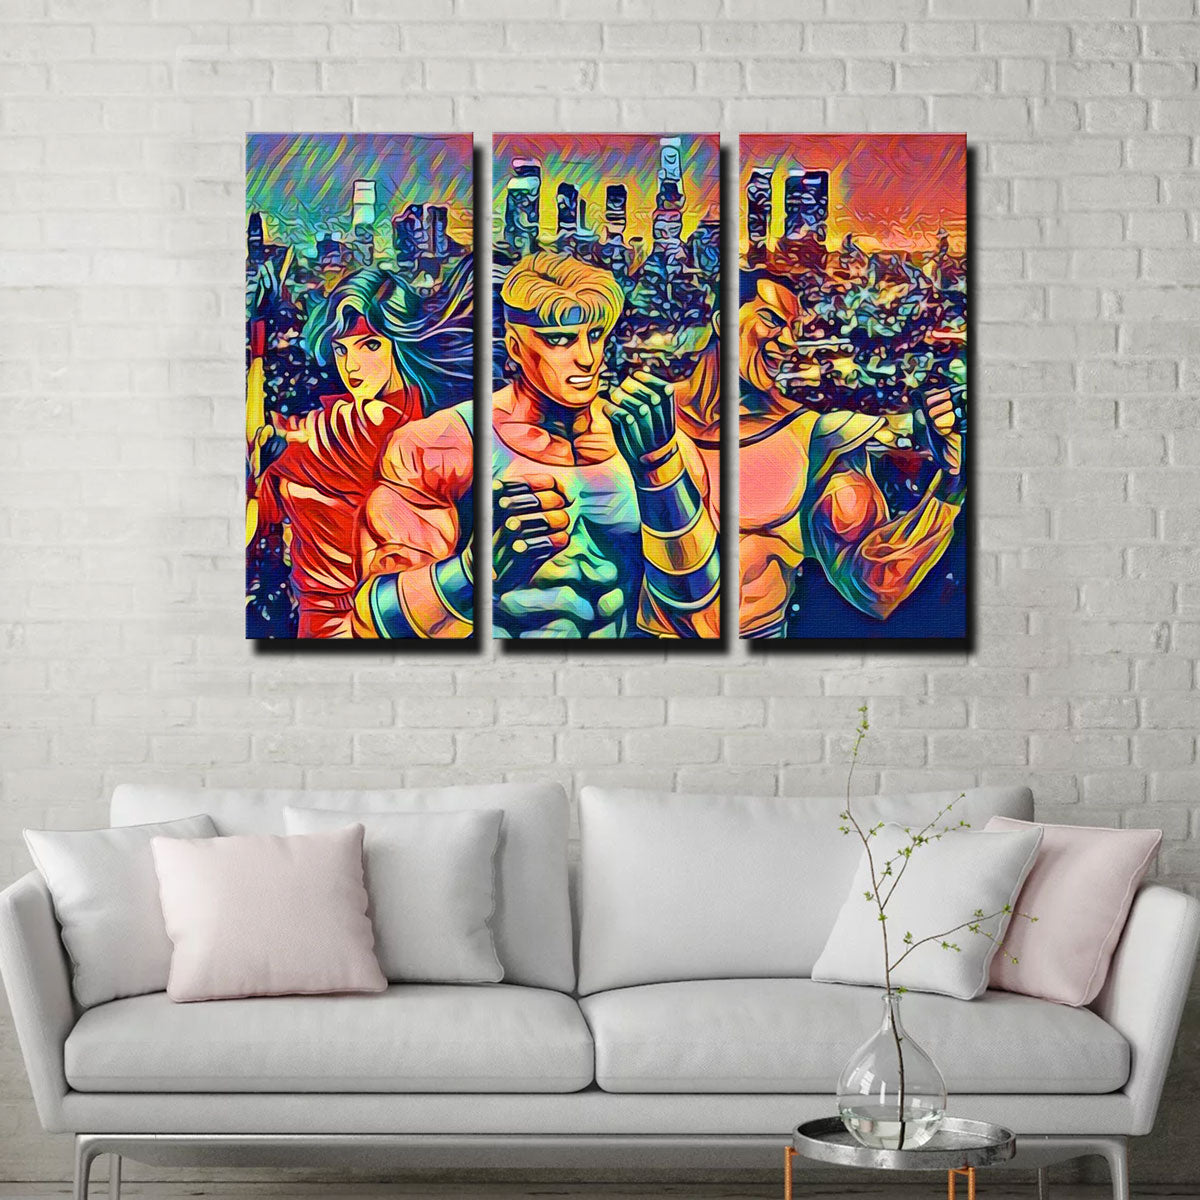 Abstract Streets of Rage Canvas Set – Legendary Wall Art